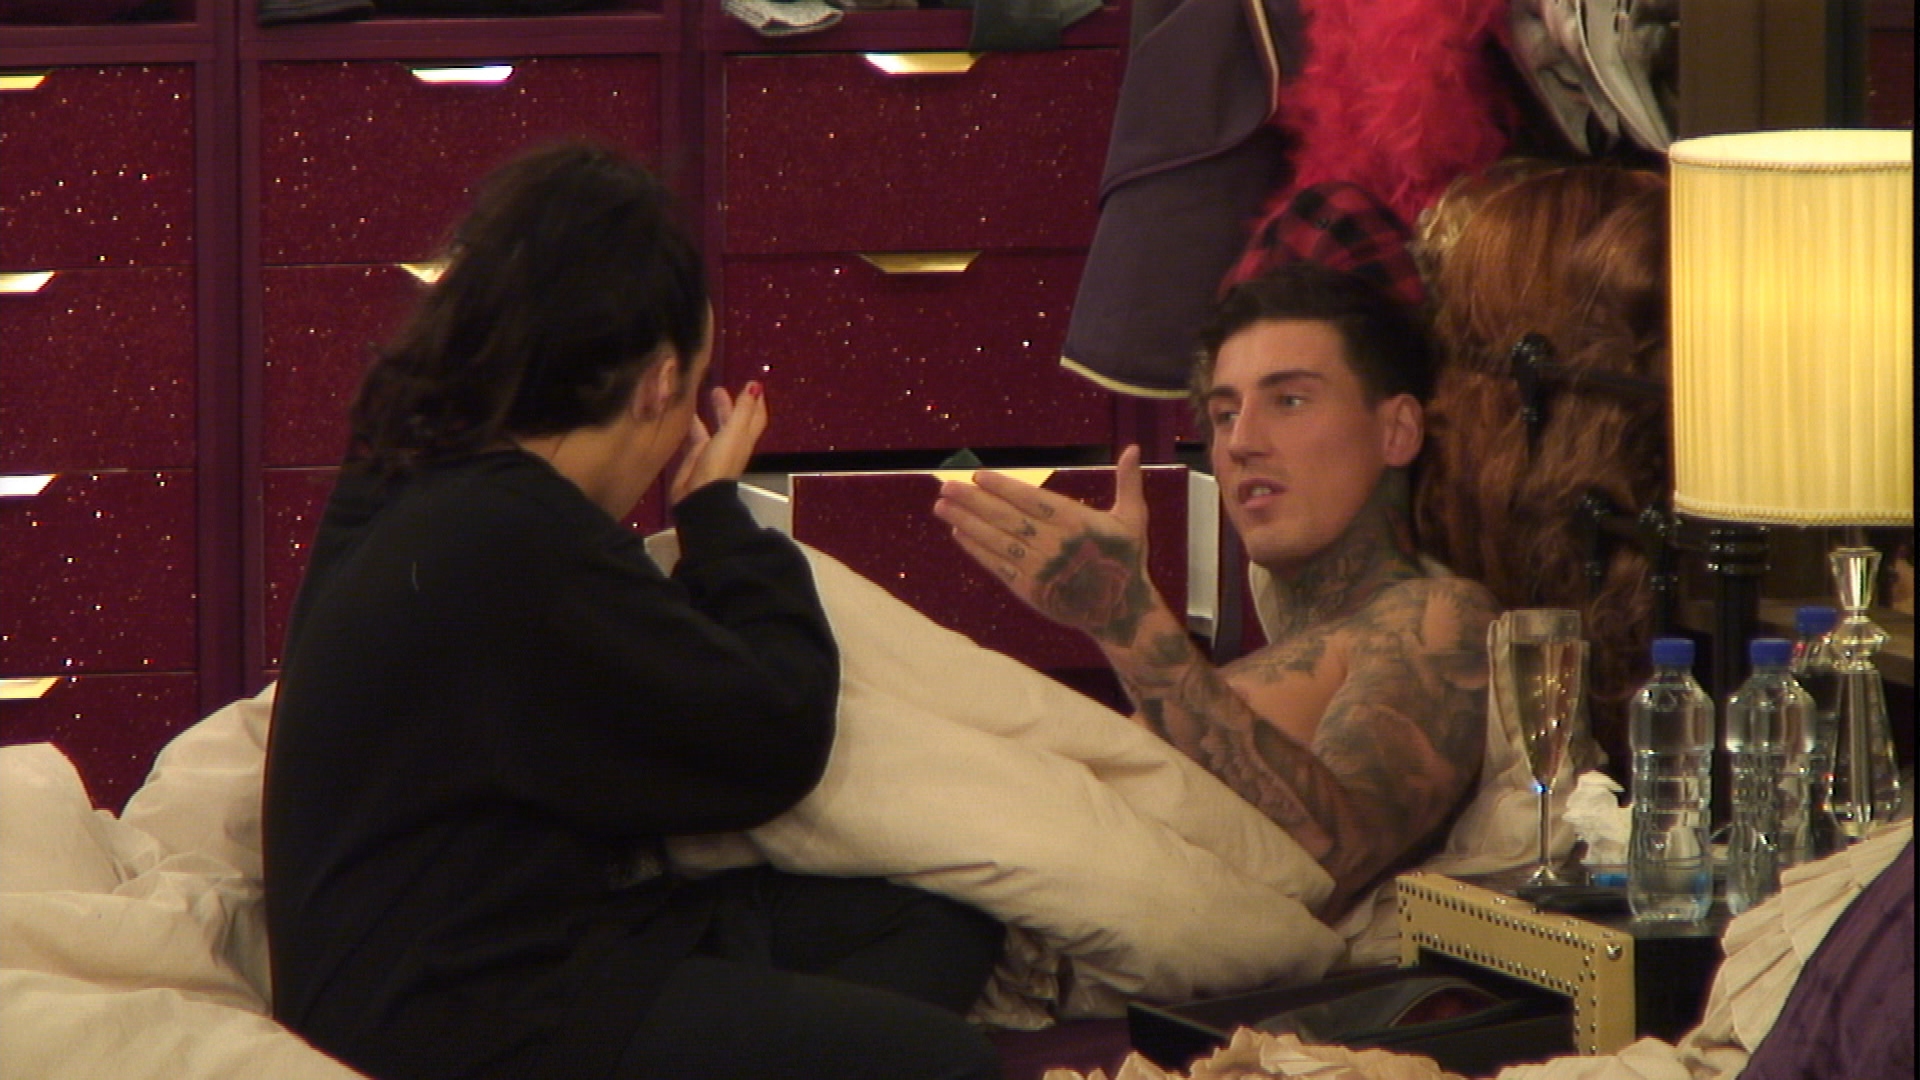 Day 13: Jeremy and Stephanie come under fire from other Housemates